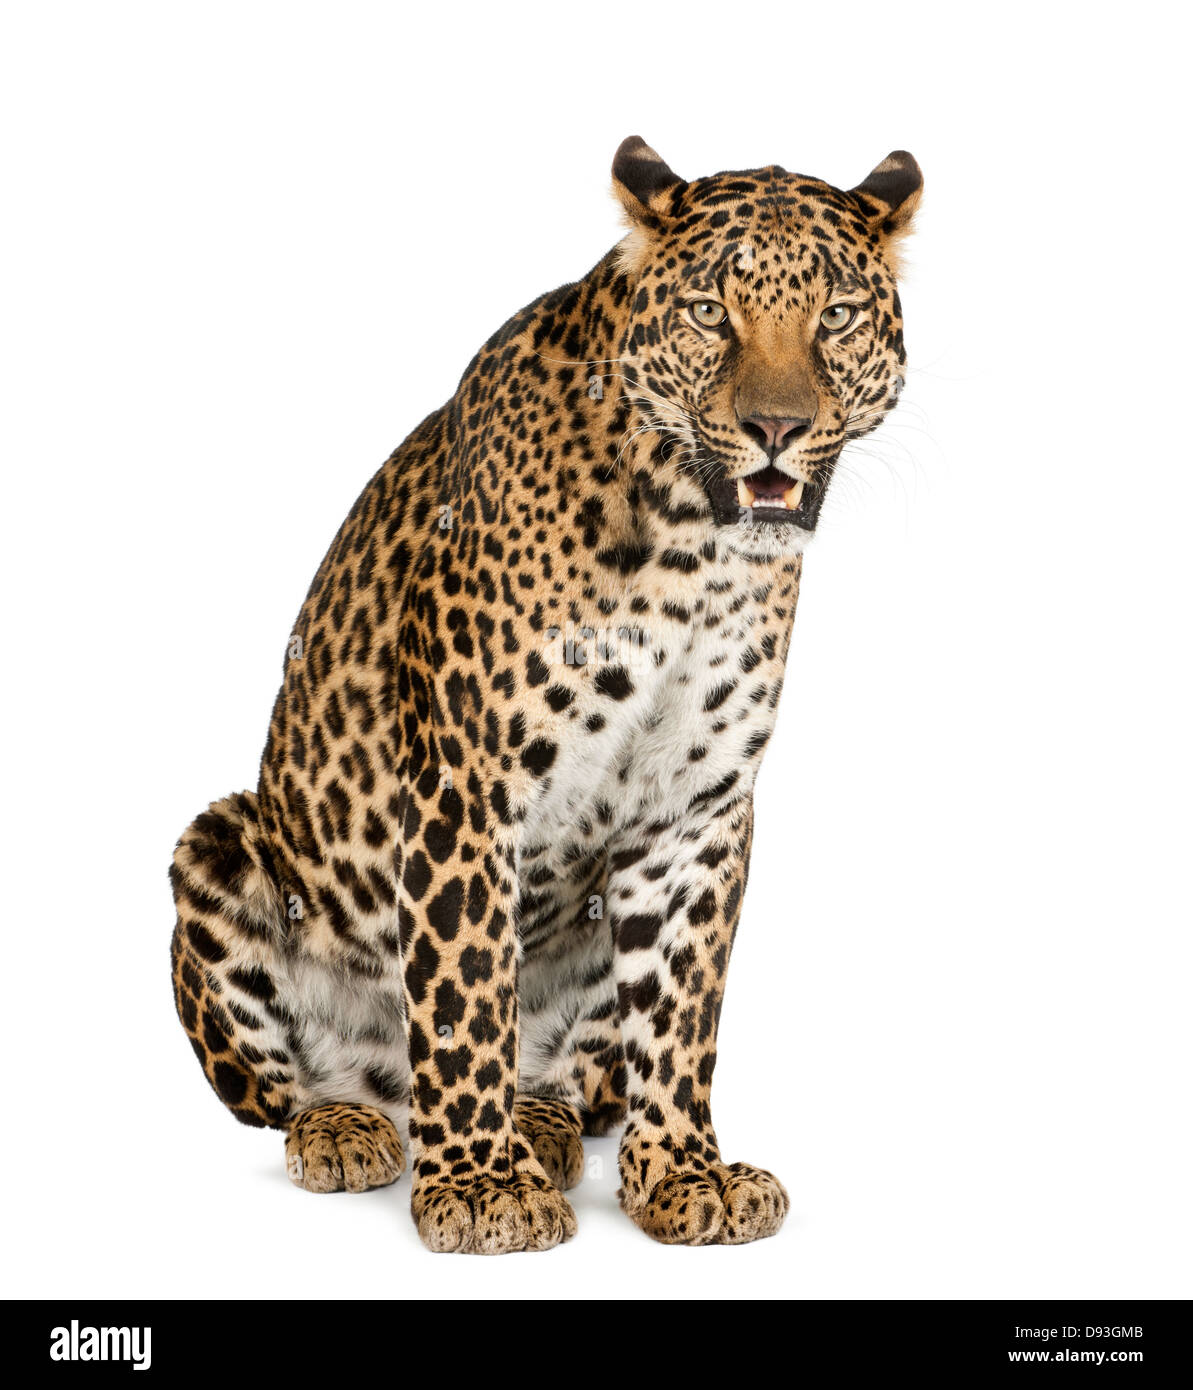 Leopard, Panthera pardus, growling and sitting in front of white background Stock Photo